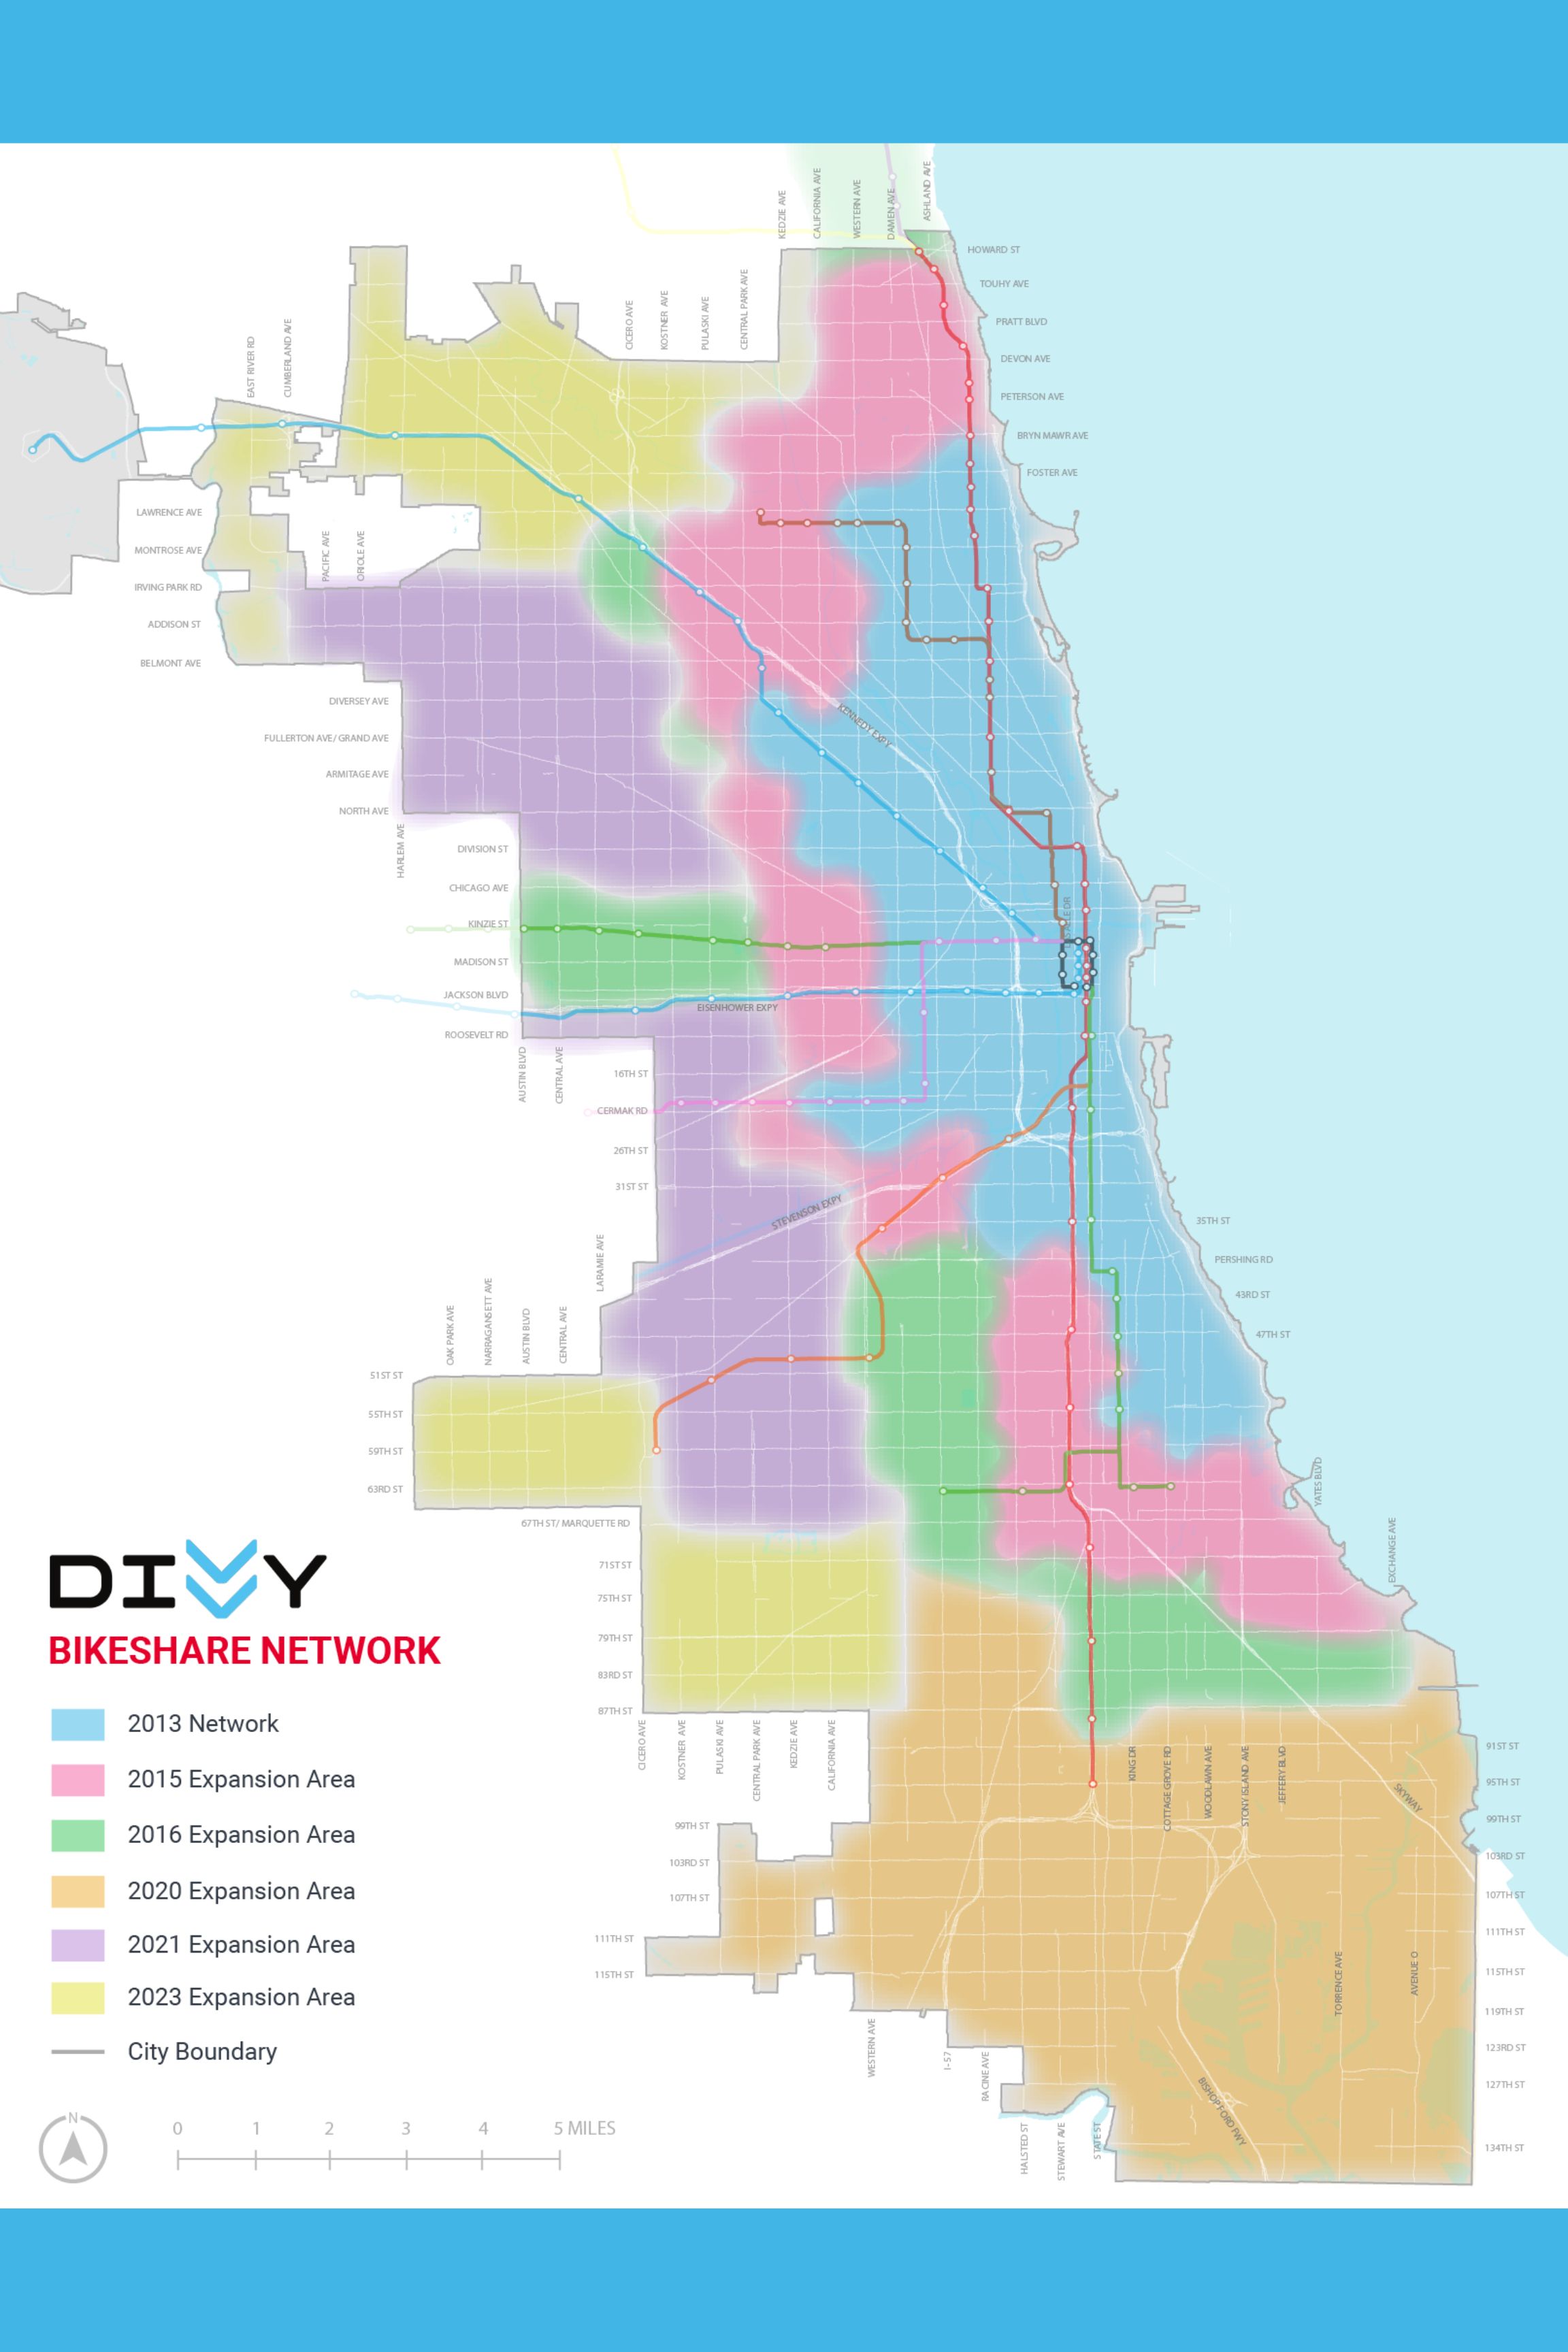 Map of Chicago showing the growth of the Divvy network since 2013